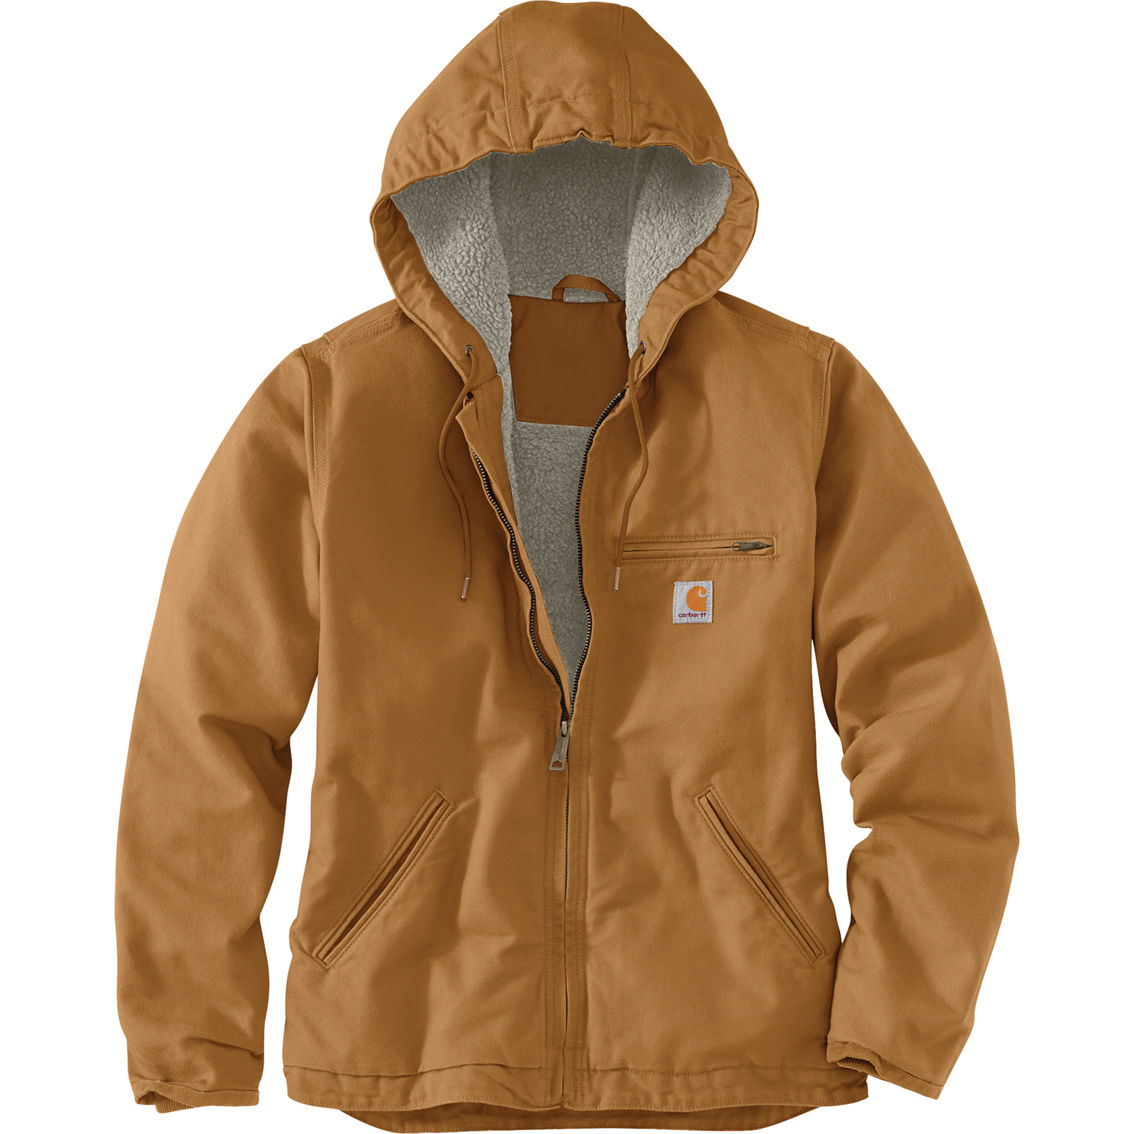 Carhartt Loose Fit Washed Duck Sherpa Lined Jacket | Jackets | Clothing ...